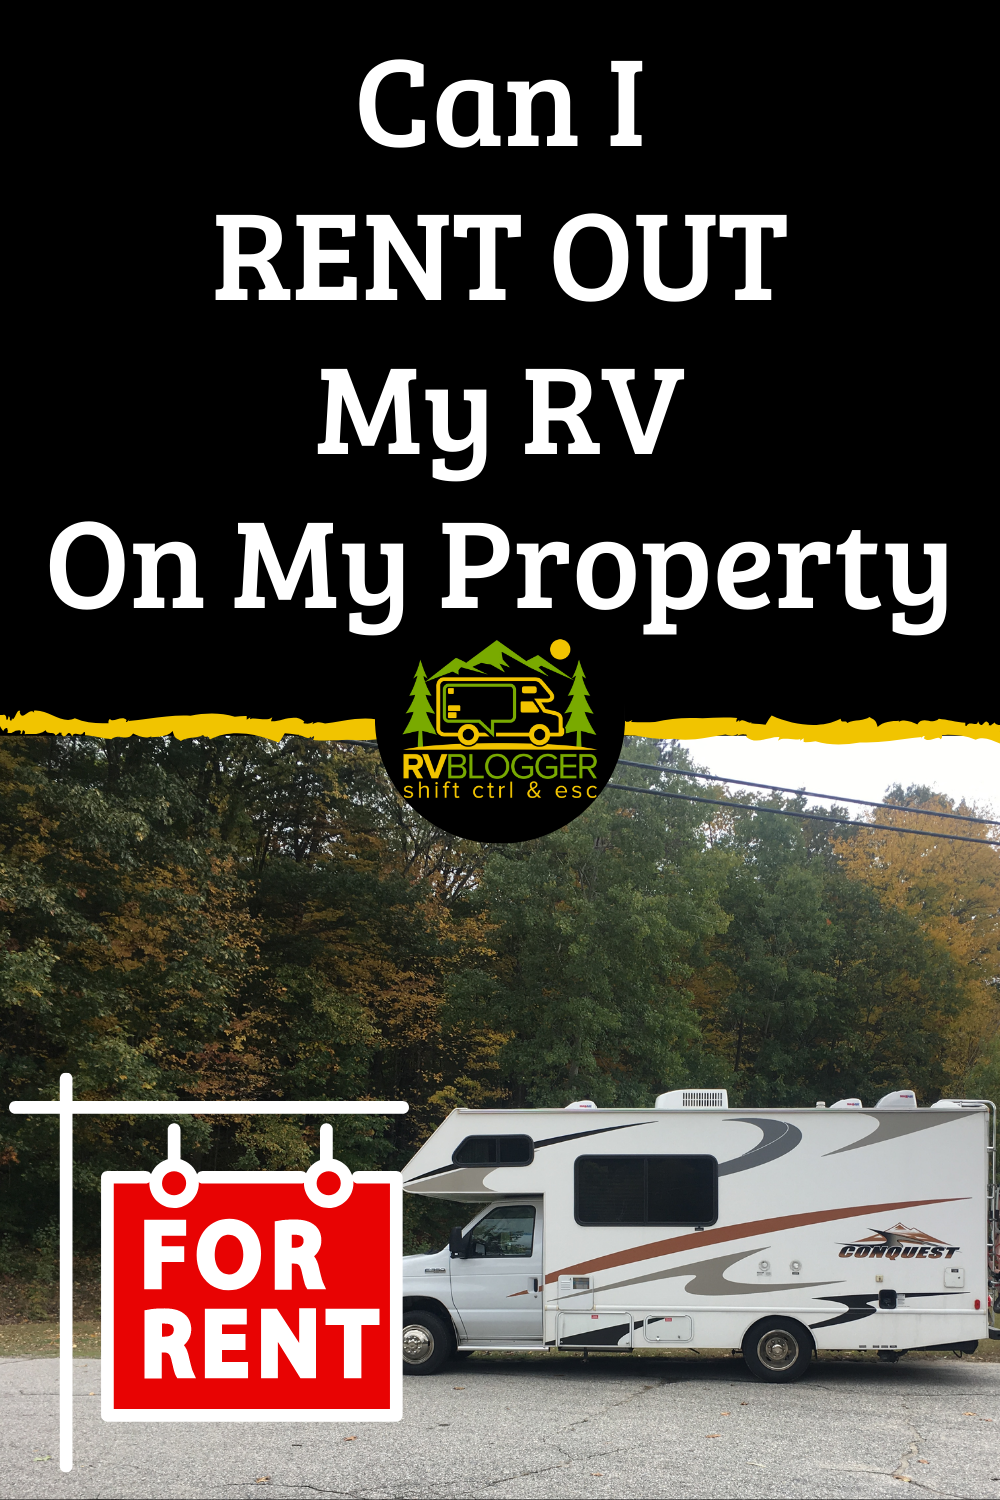 Can I Rent Out My RV On My Property?